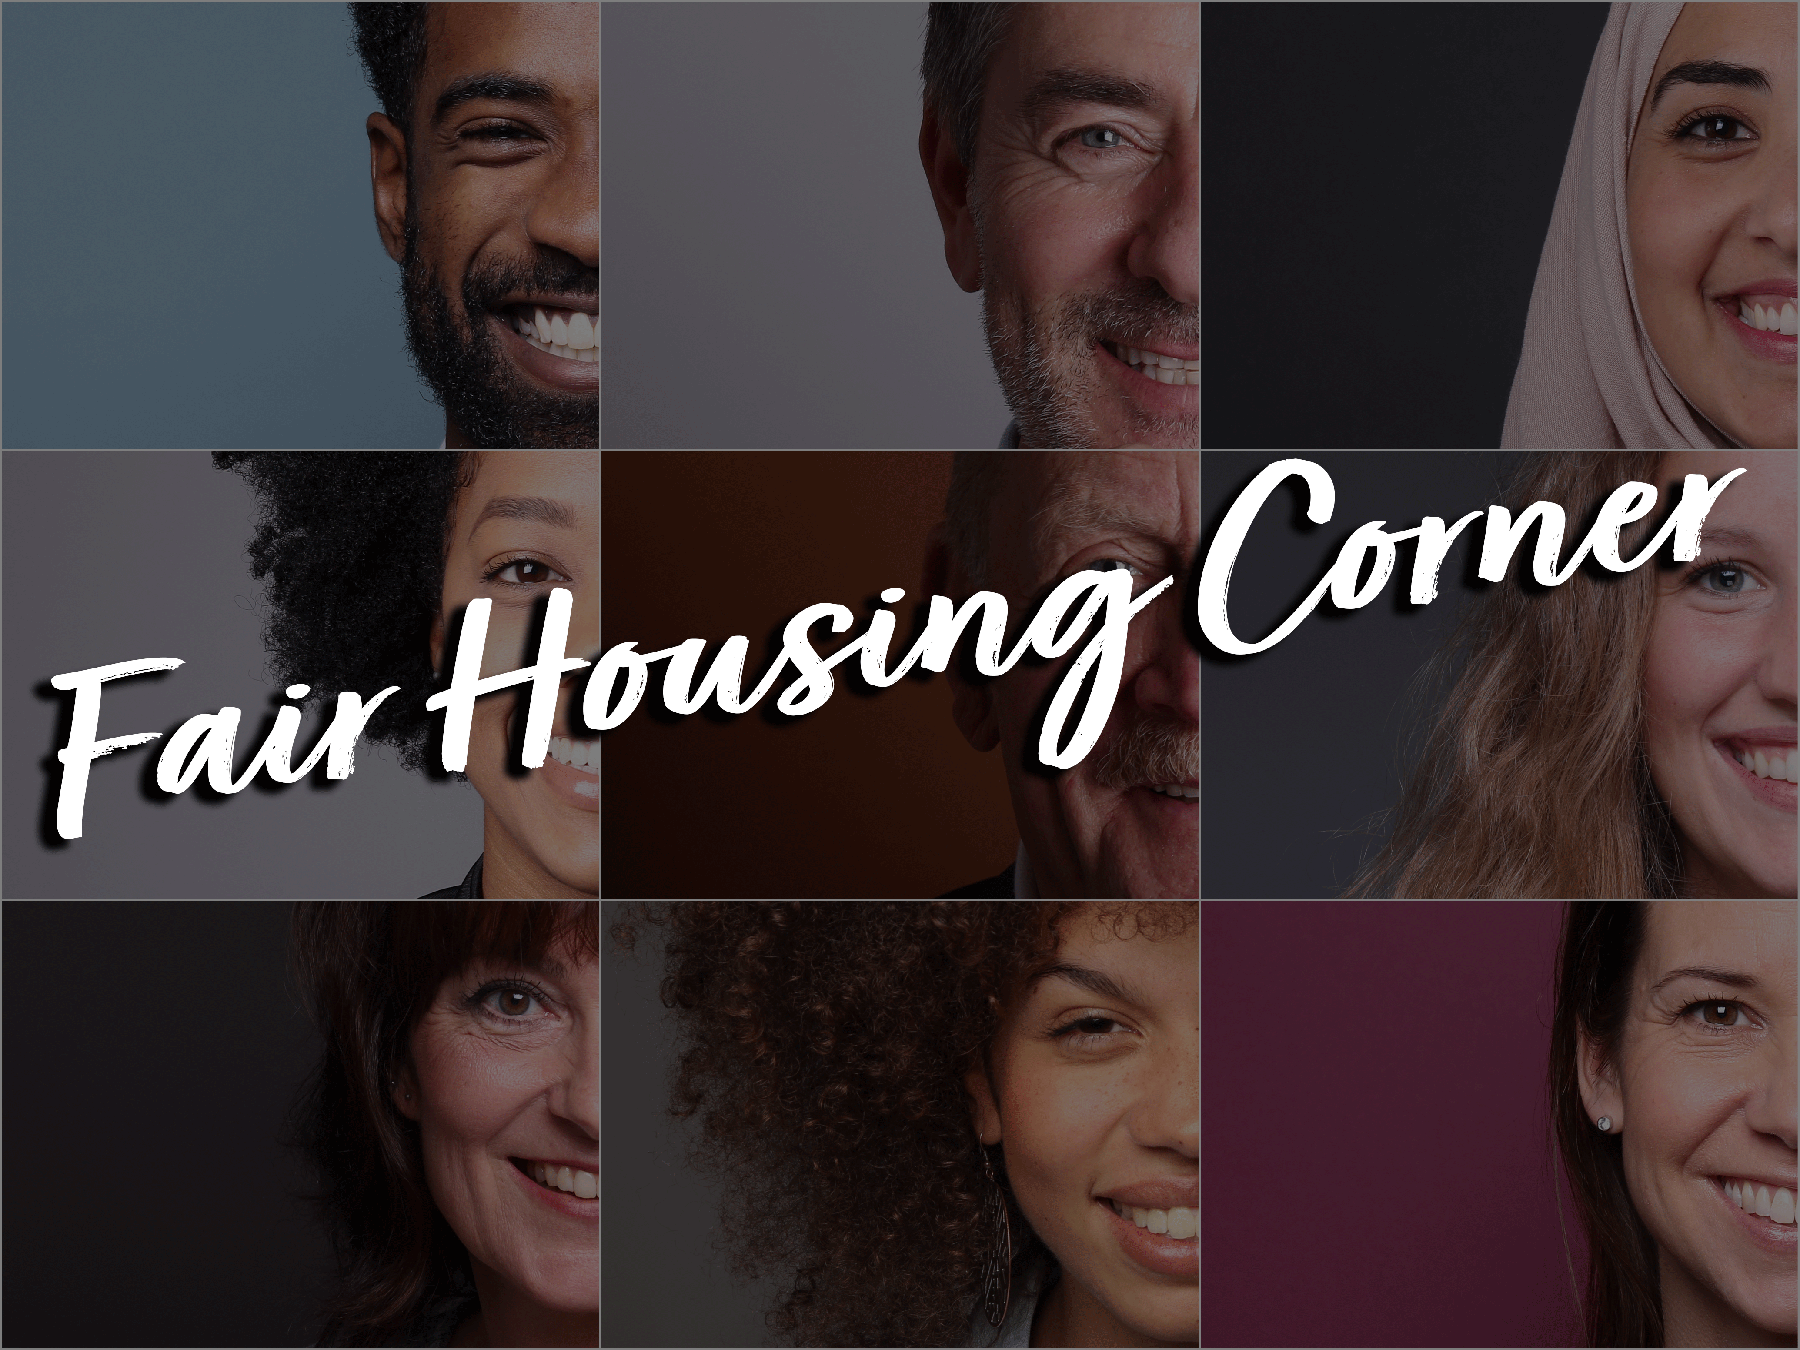 Legal Updates on the Fair Housing Act